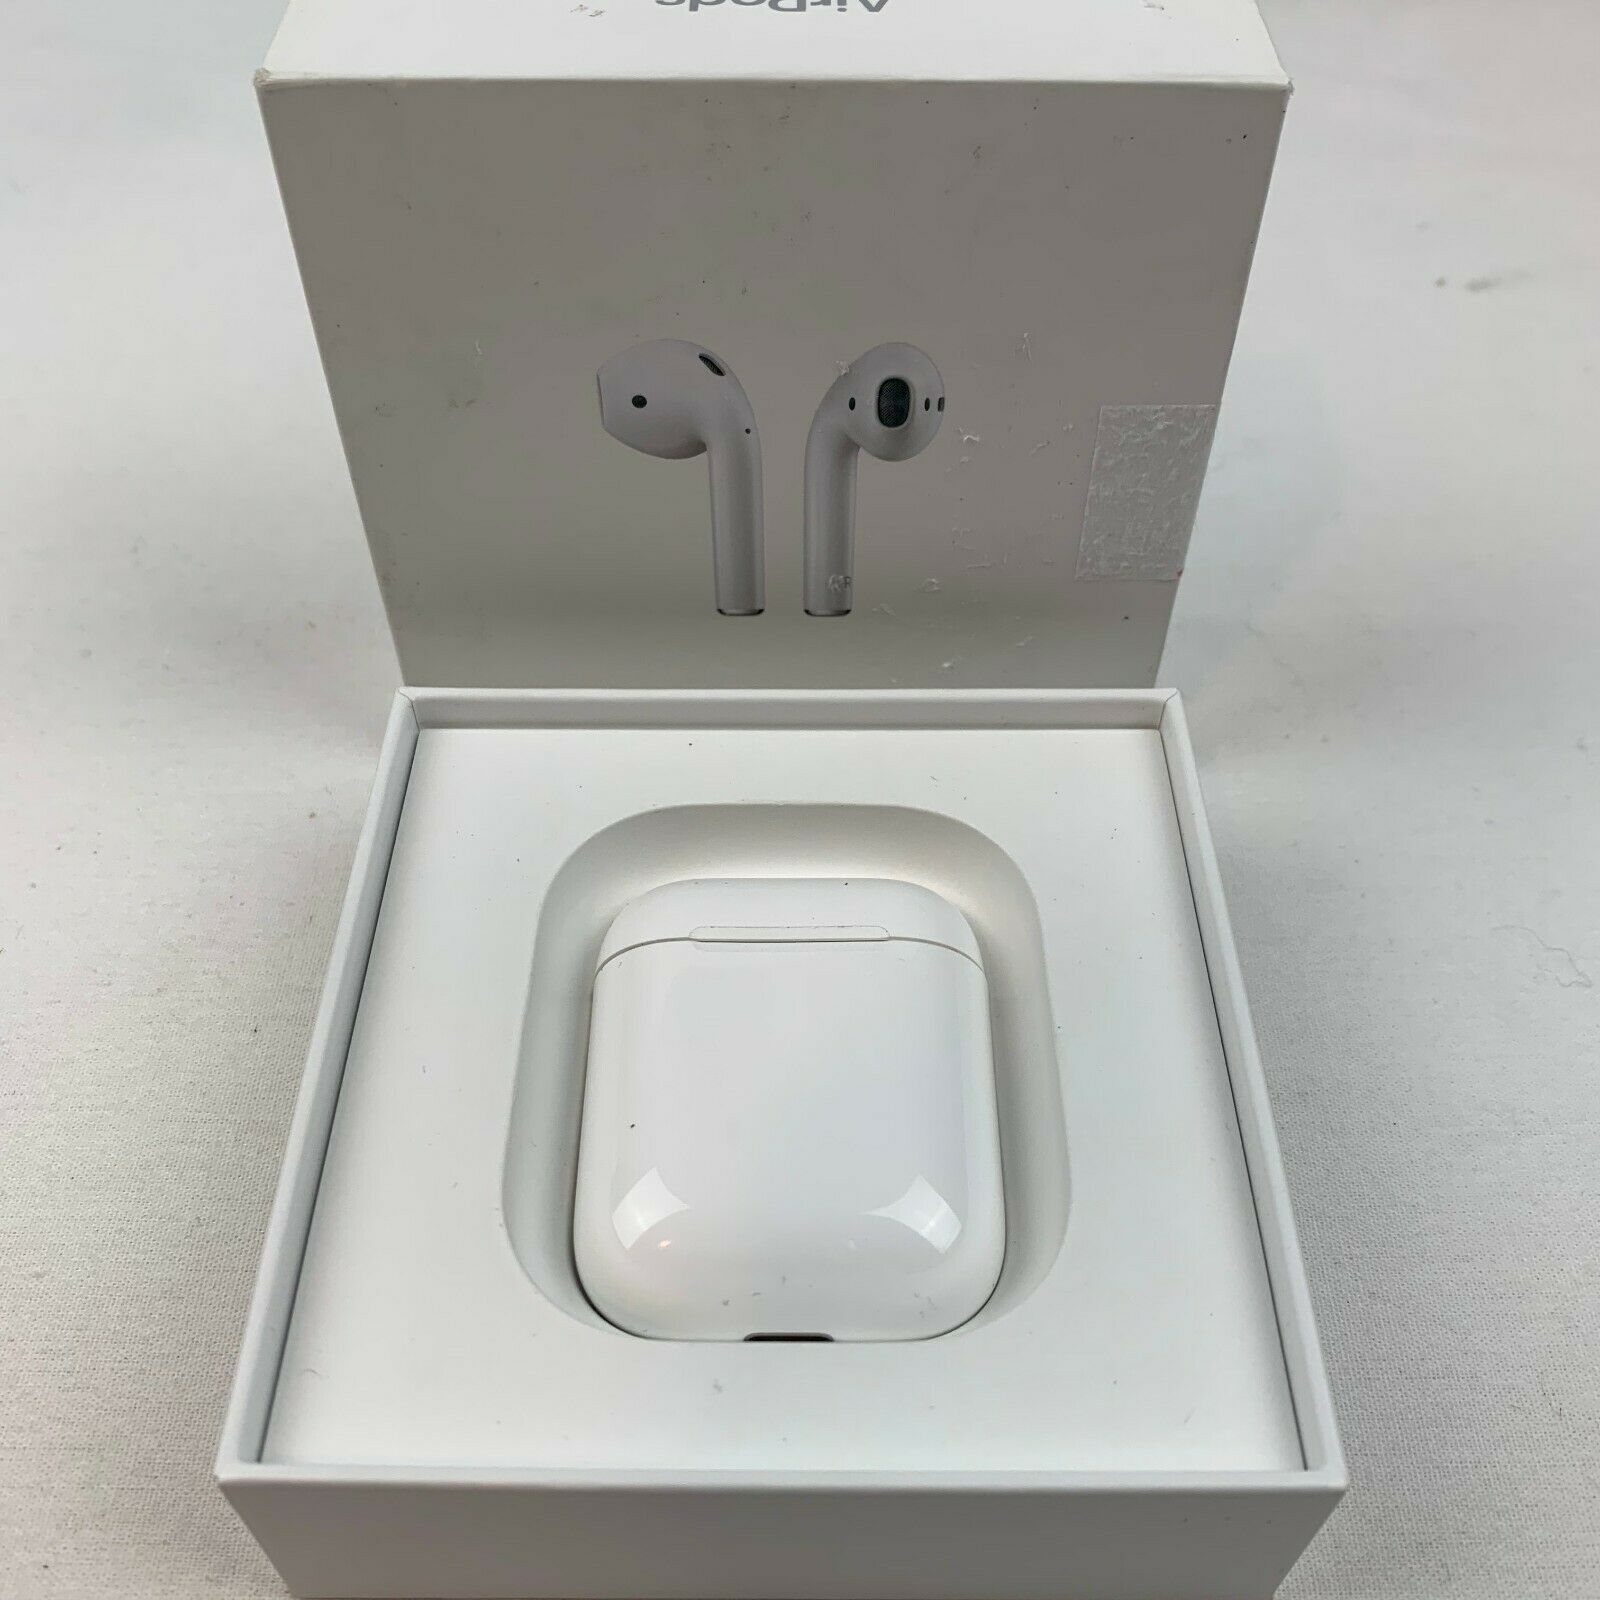 How Much Is Apple Airpods In Ghana - Madihah Buxton